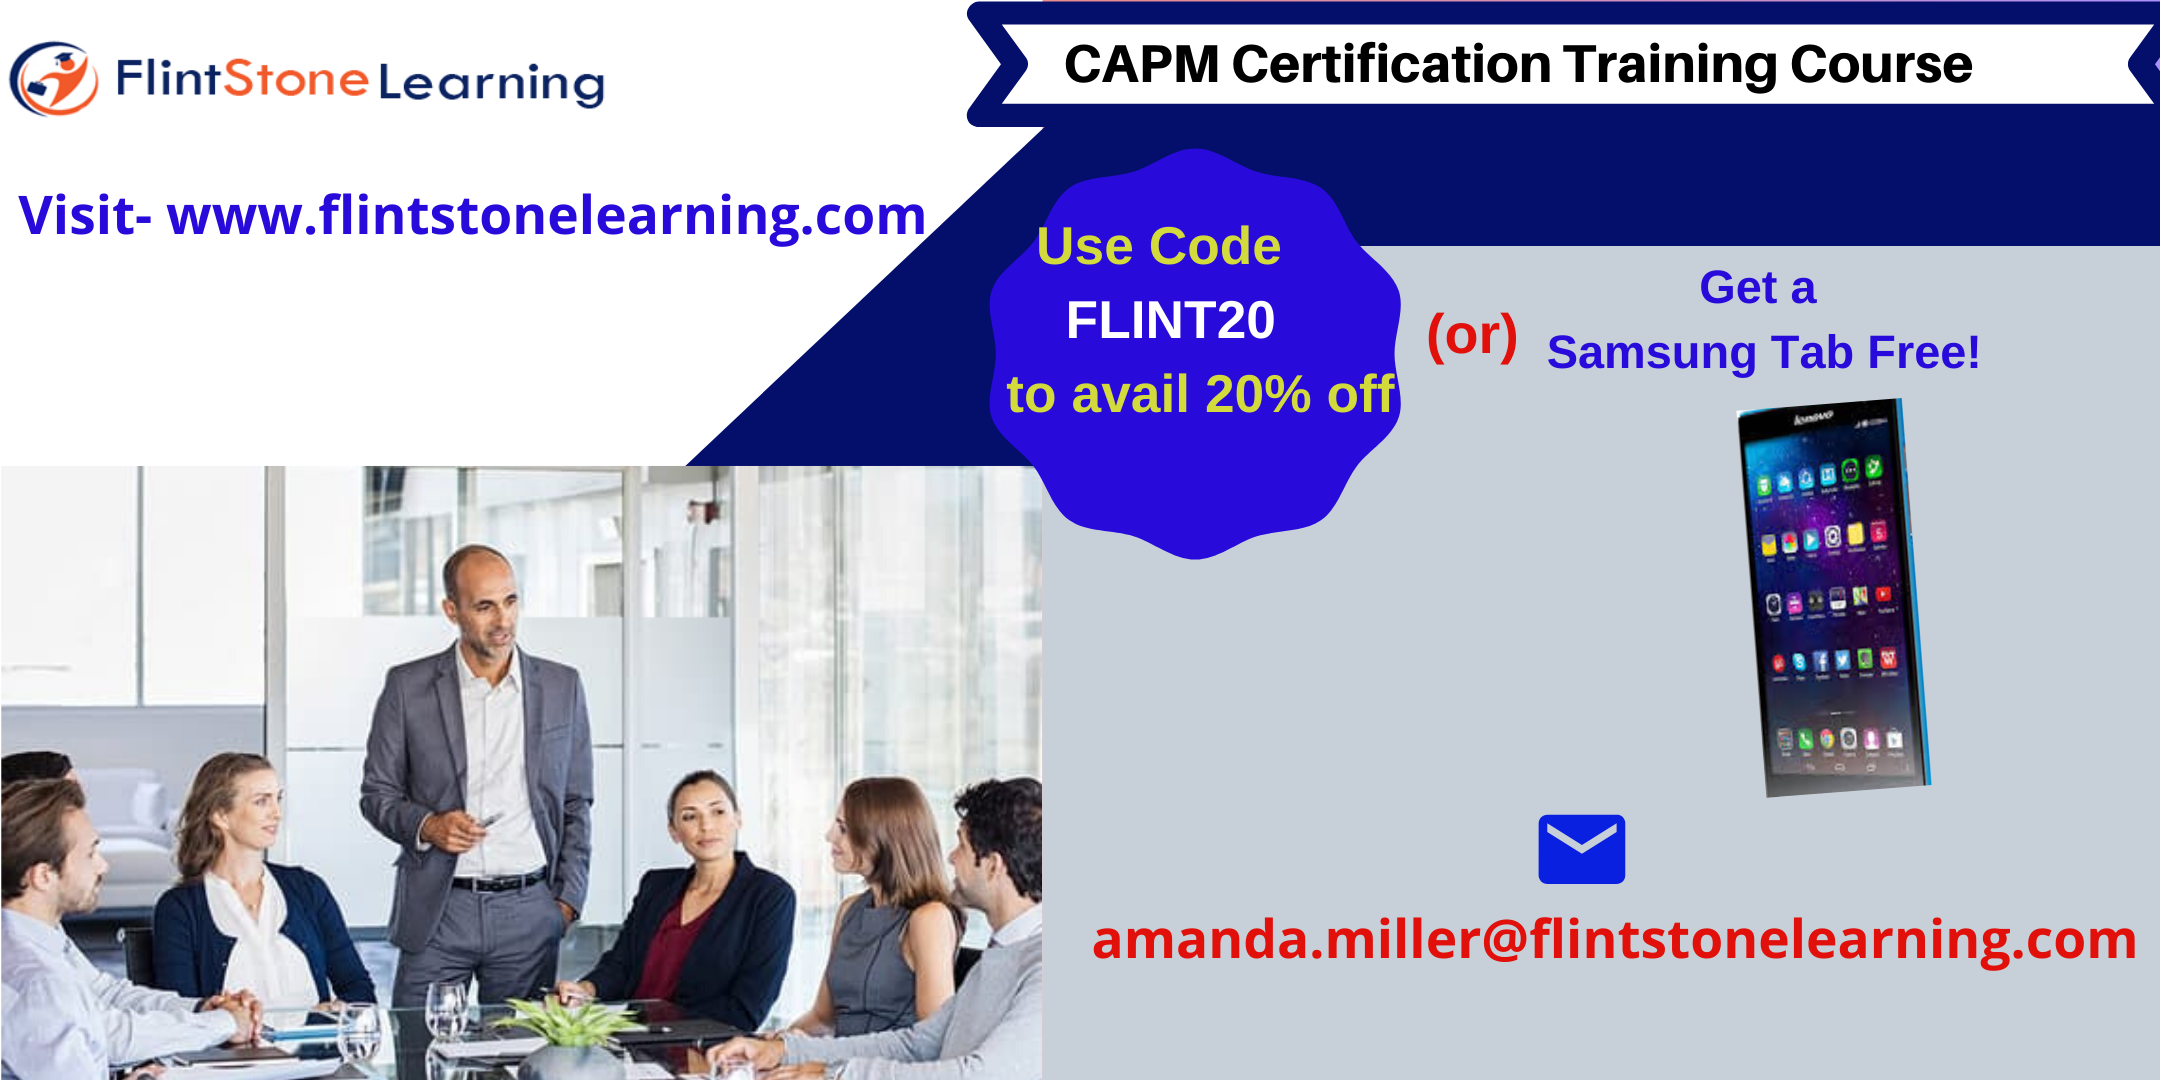 CAPM Certification Training Course in Sandy Springs, GA